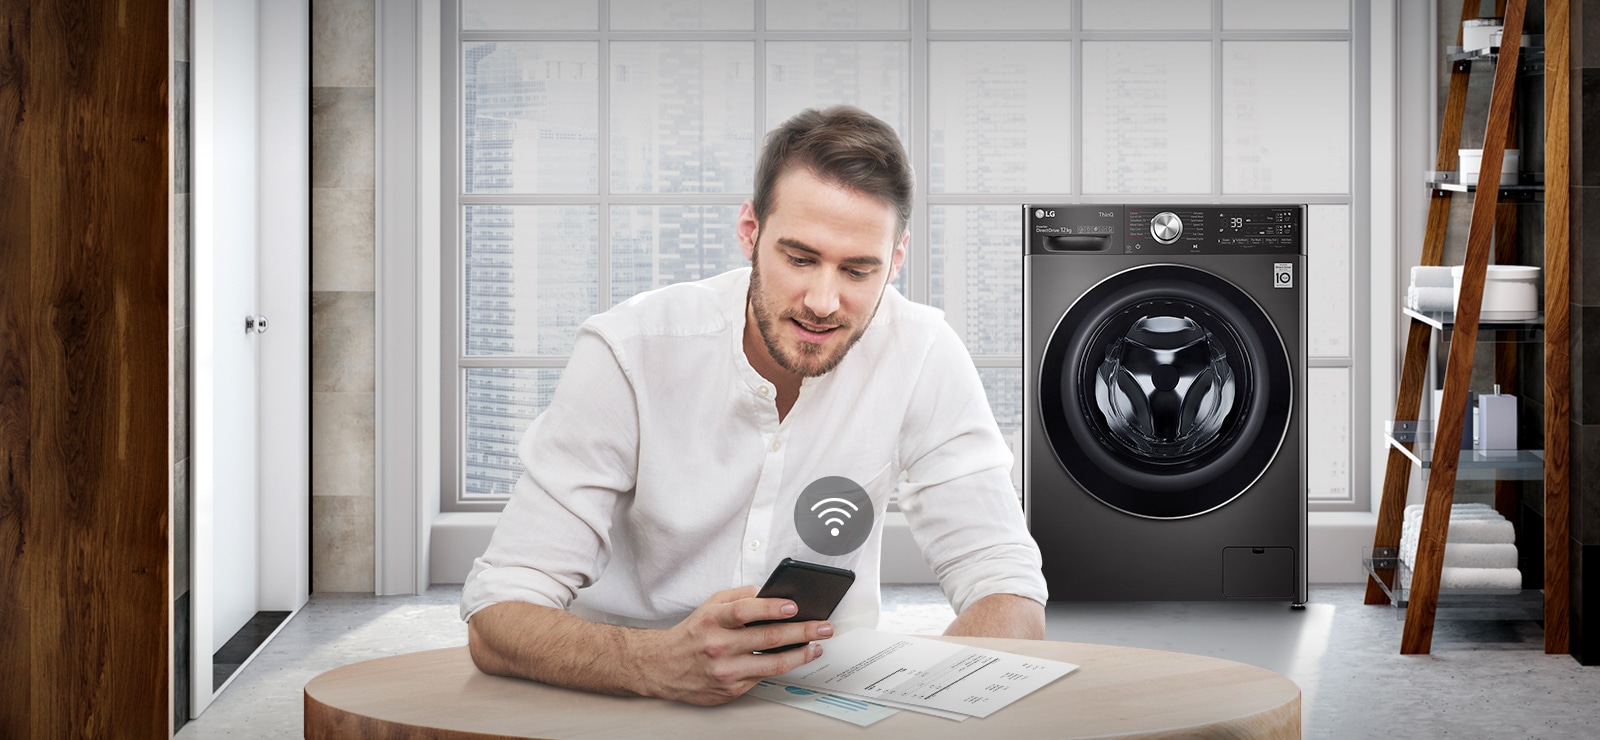 A man is monitoring the condition of the washing machine through a mobile phone app.